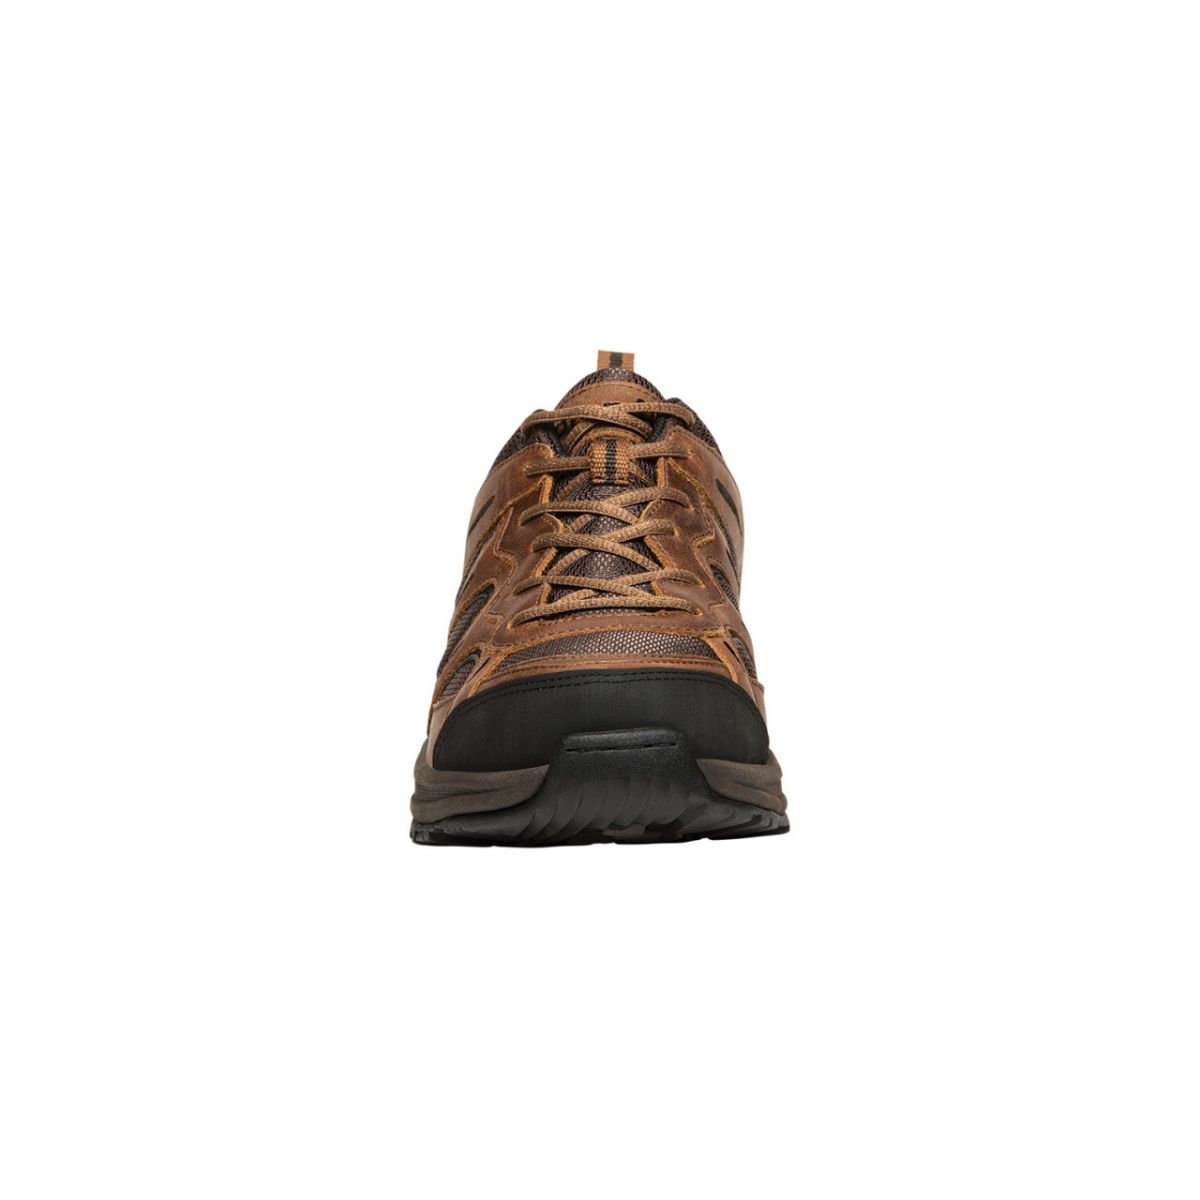 Propet Men's Connelly Hiking Shoe Brown - M5503BR BROWN - BROWN, 7-D